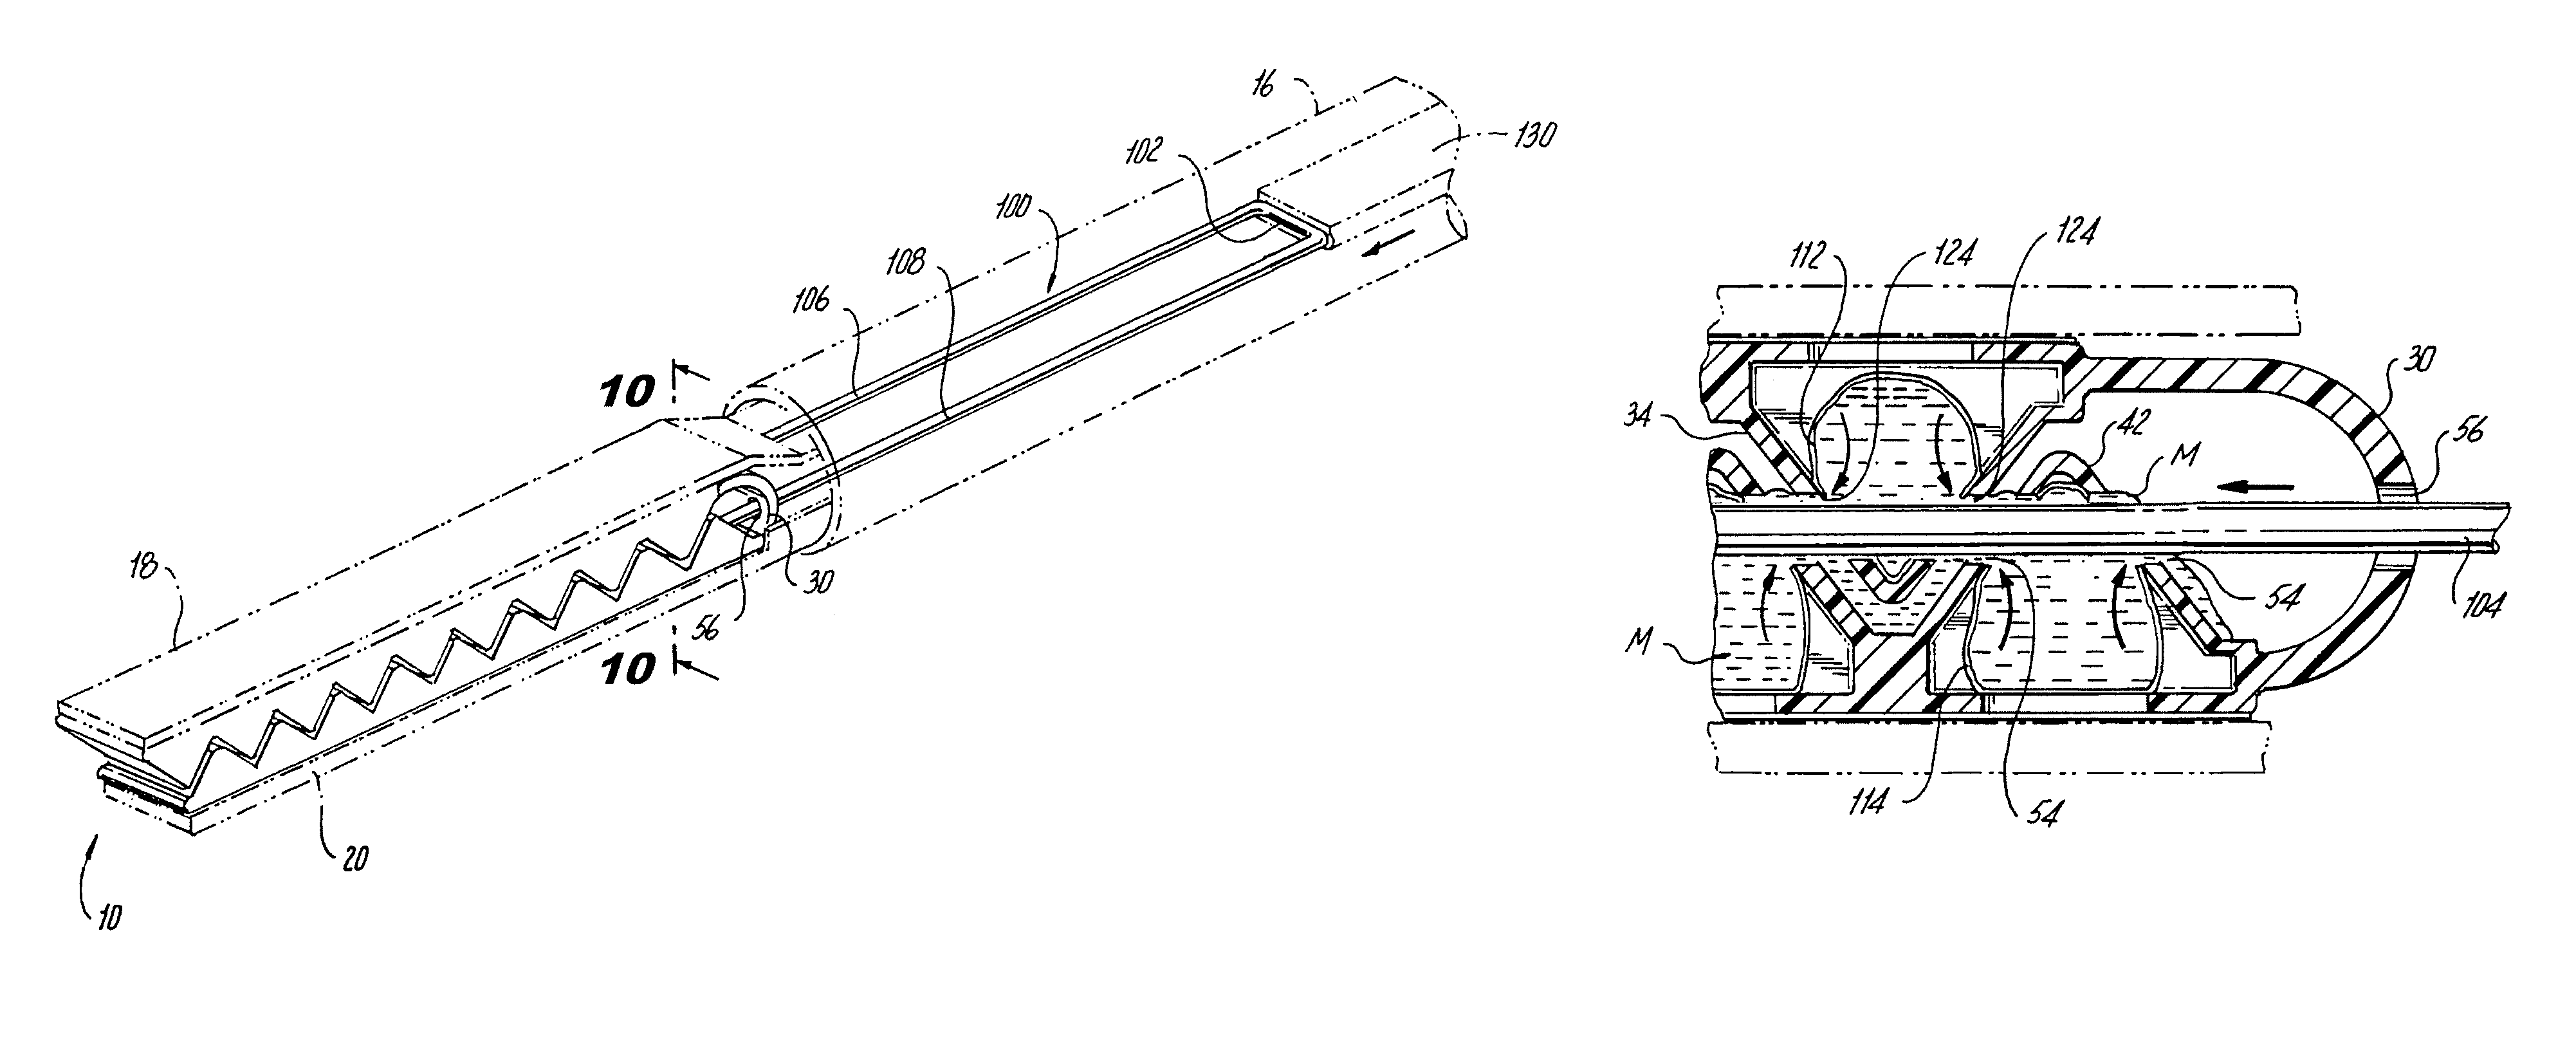 Fluid delivery system for surgical instruments